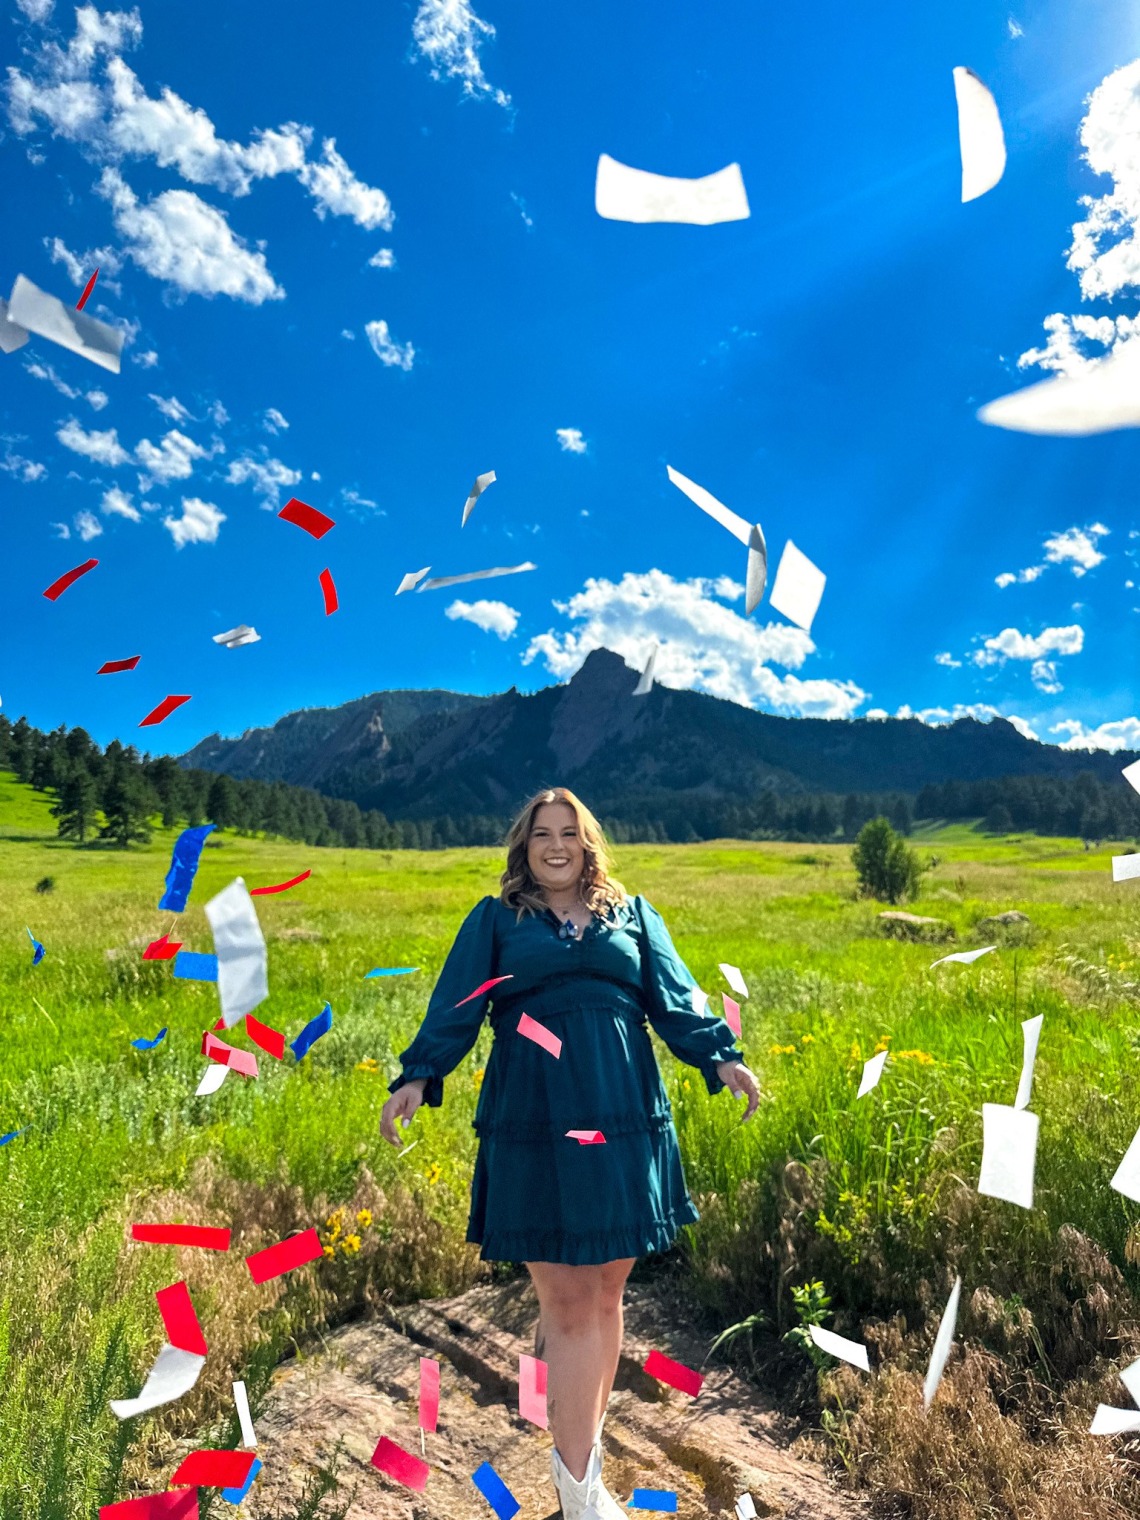 Student Haley McCarthy poses in front of a mountain landscape, and confetti flutters down around her.